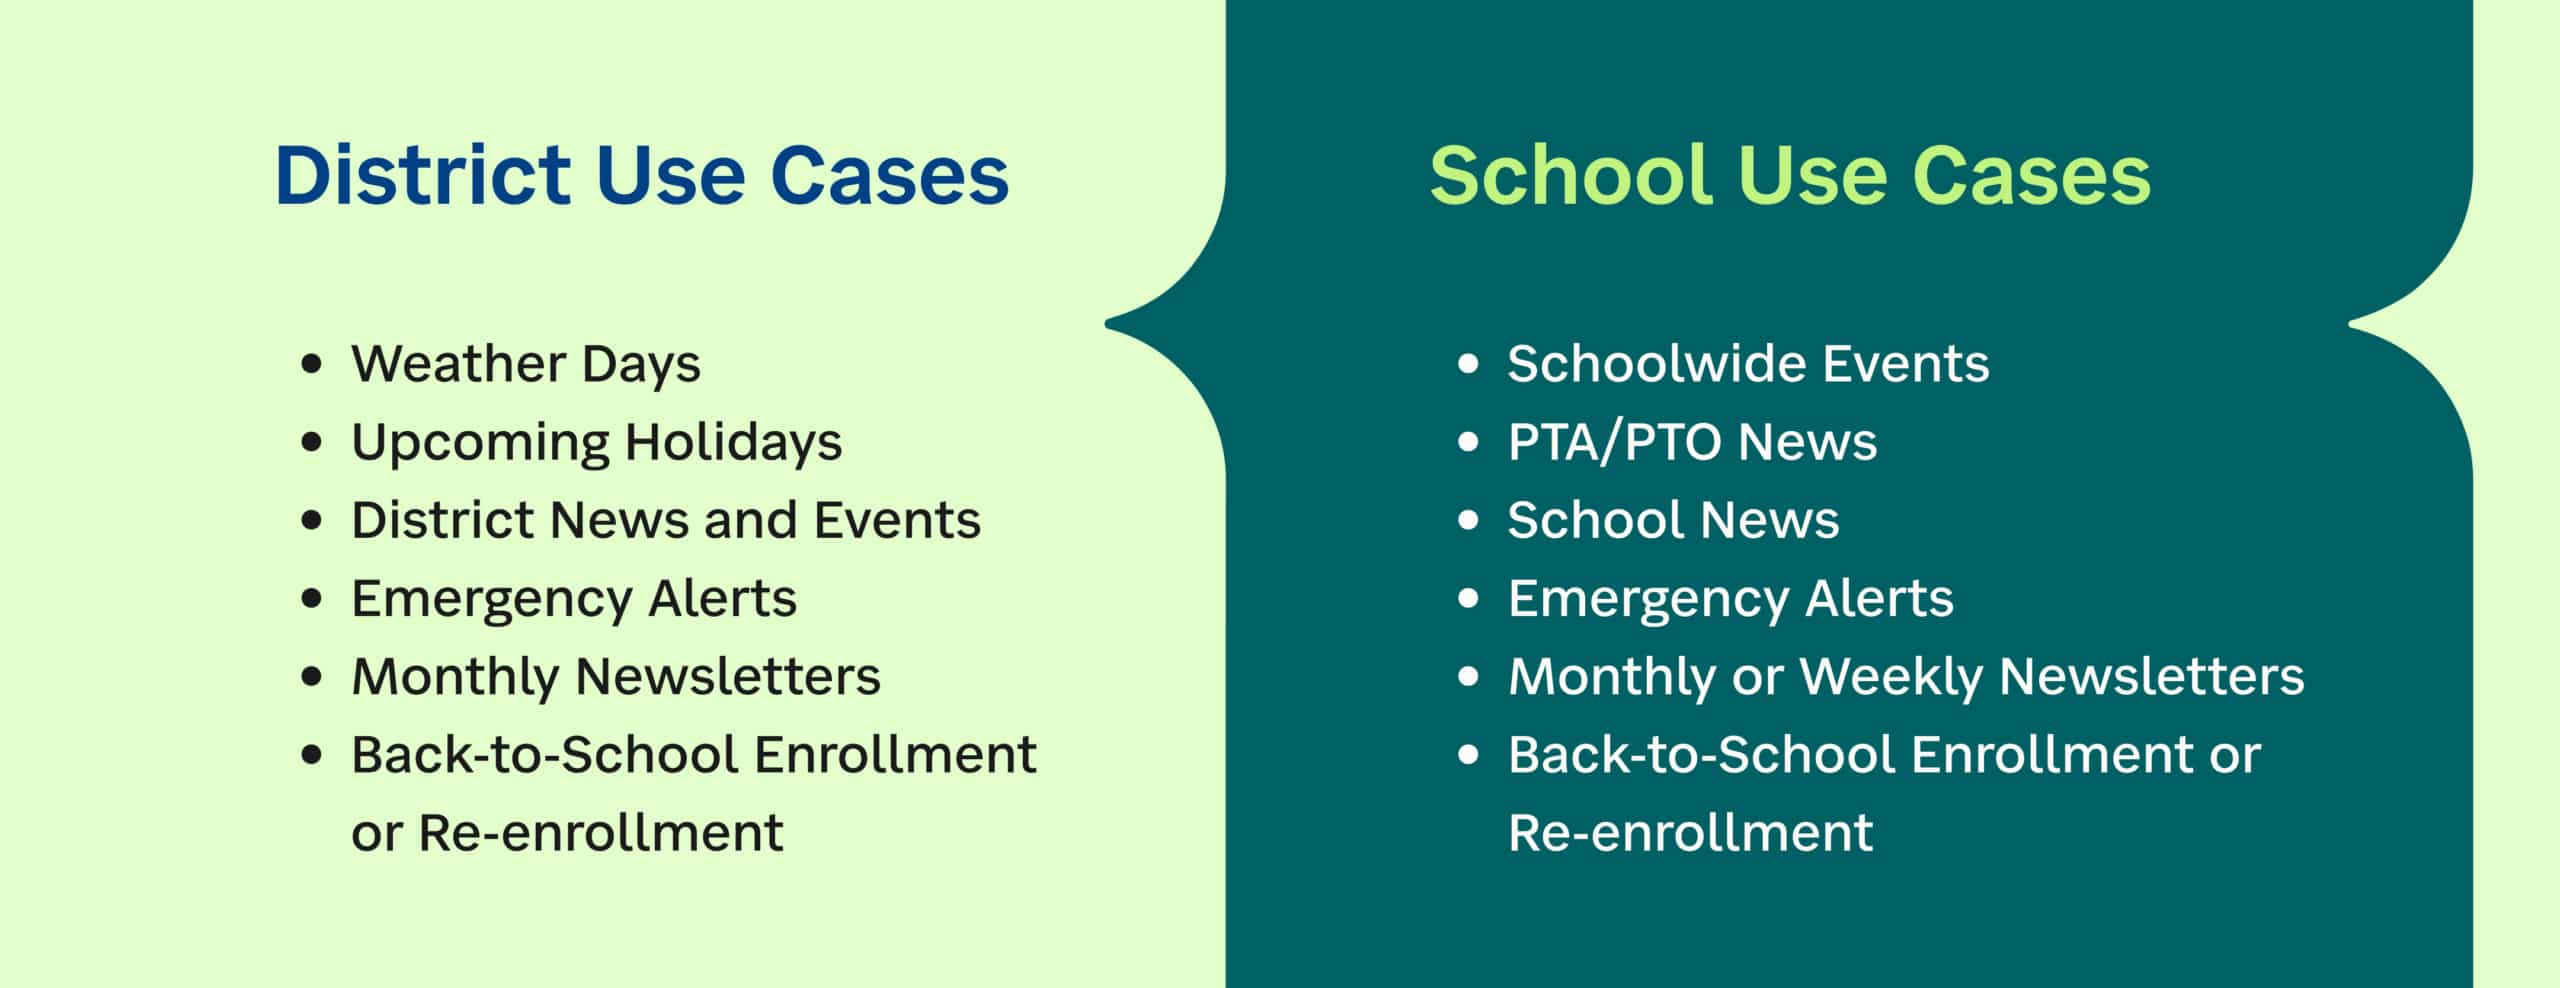 Infographic compares District and School use cases